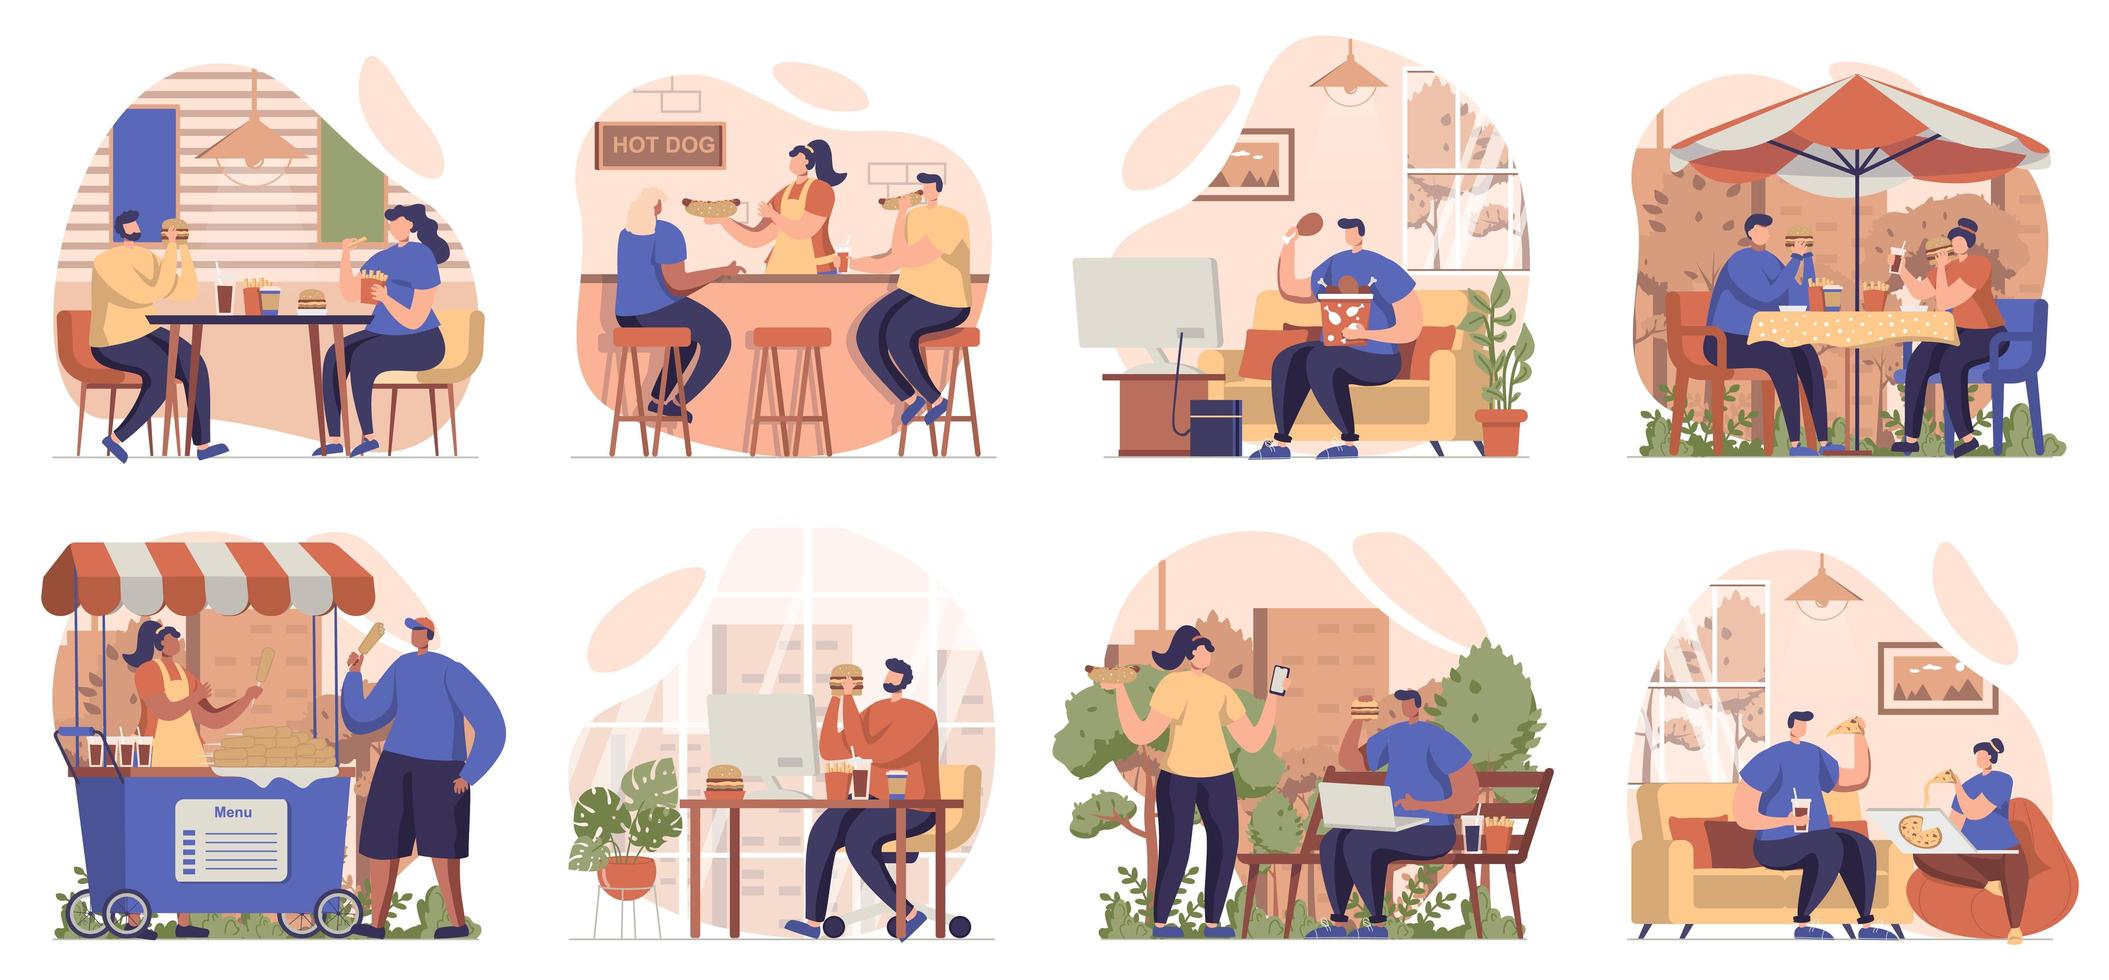 People eating fast food collection of scenes isolated. Customers at street cafes and restaurants, set in flat design. Vector illustration for blogging, website, mobile app, promotional materials.